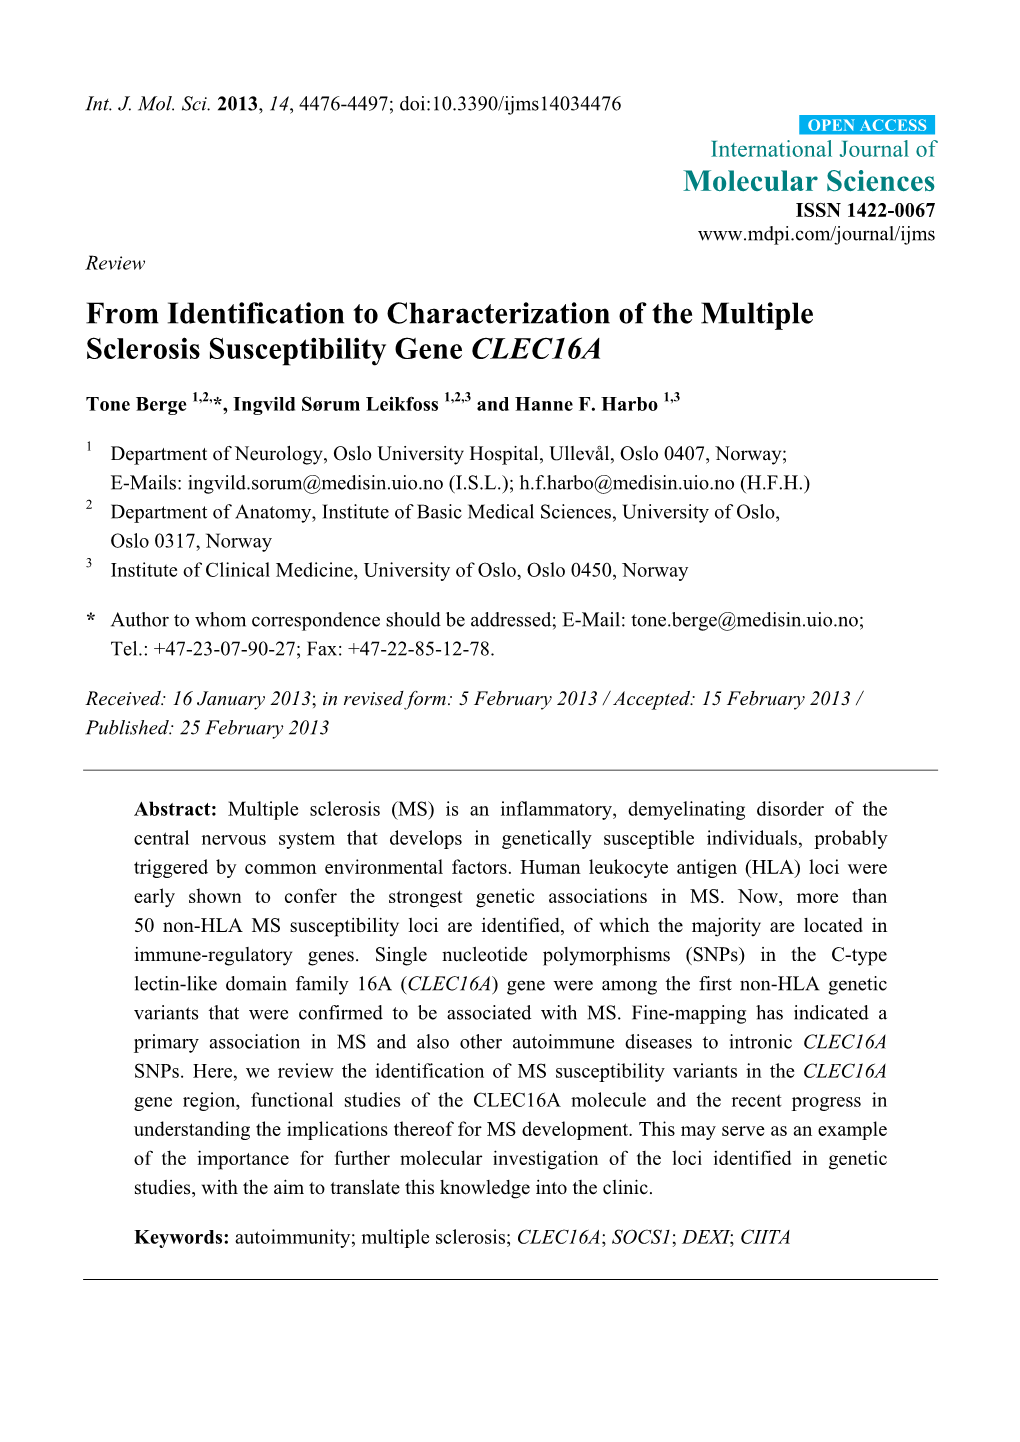 From Identification to Characterization of the Multiple Sclerosis Susceptibility Gene CLEC16A